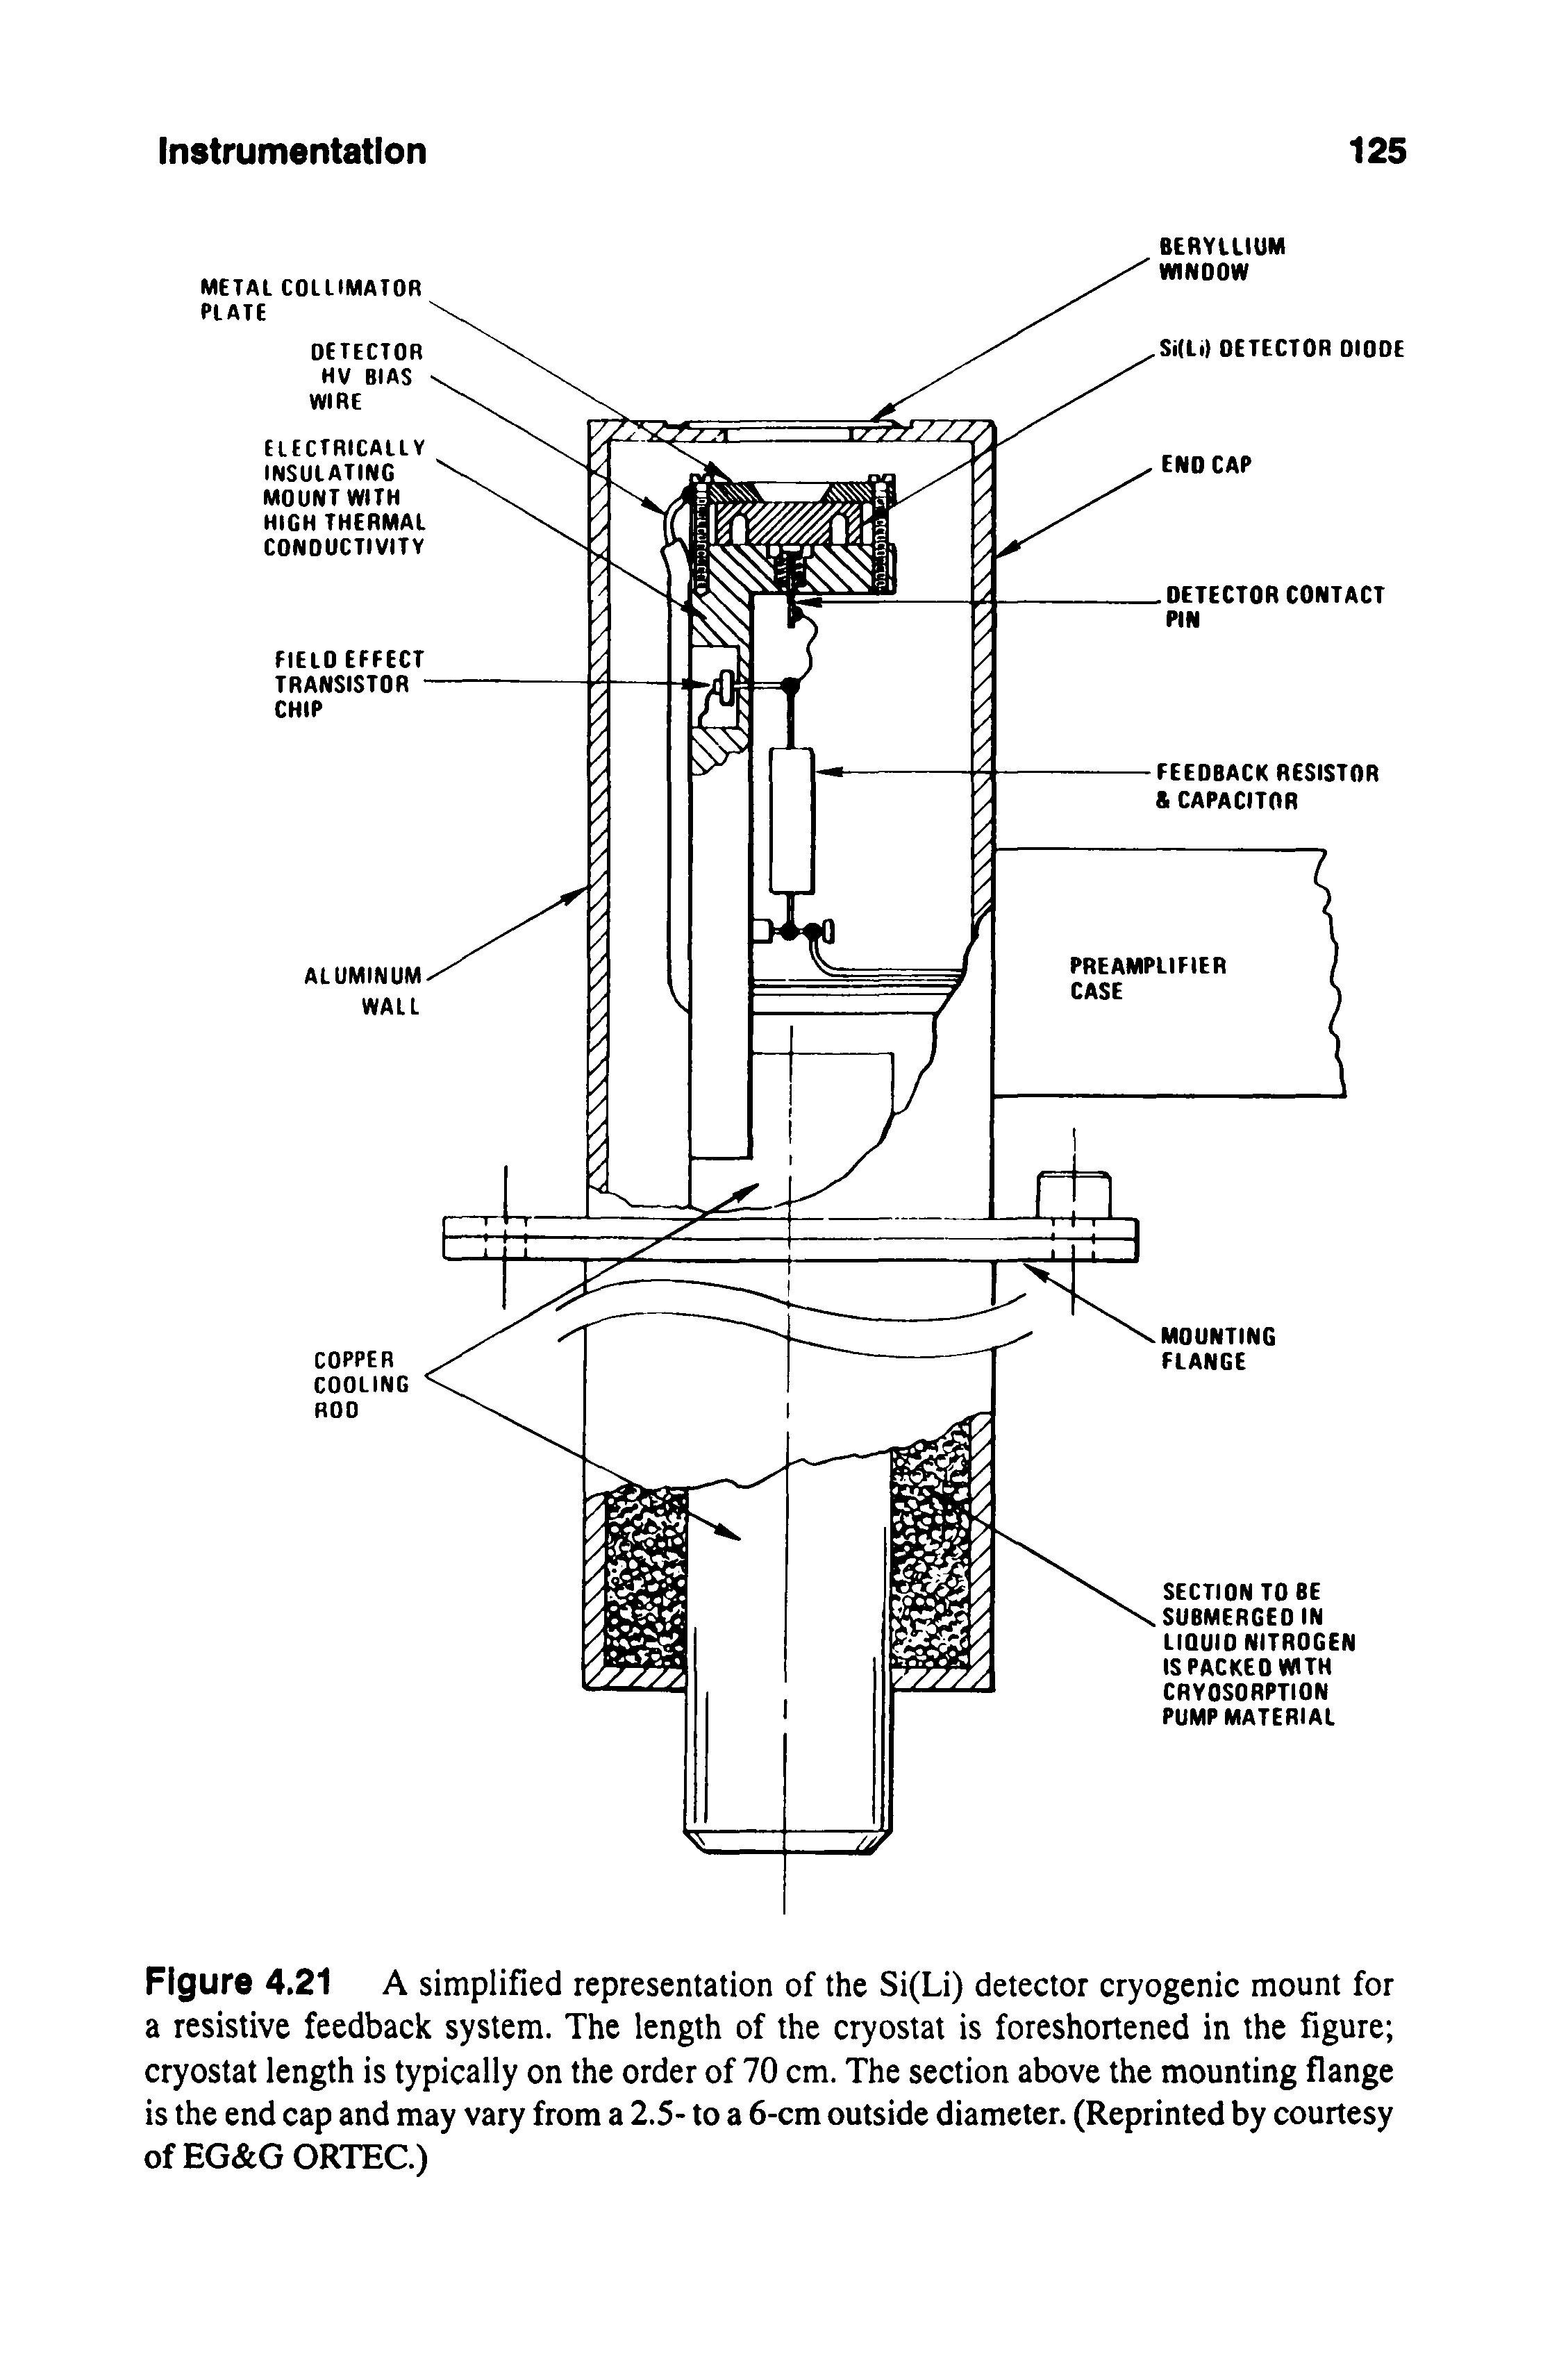 Figure 4.21 A simplified representation of the Si(Li) detector cryogenic mount for a resistive feedback system. The length of the cryostat is foreshortened in the figure cryostat length is typically on the order of 70 cm. The section above the mounting flange is the end cap and may vary from a 2.5- to a 6-cm outside diameter. (Reprinted by courtesy ofEG G ORTEC.)...